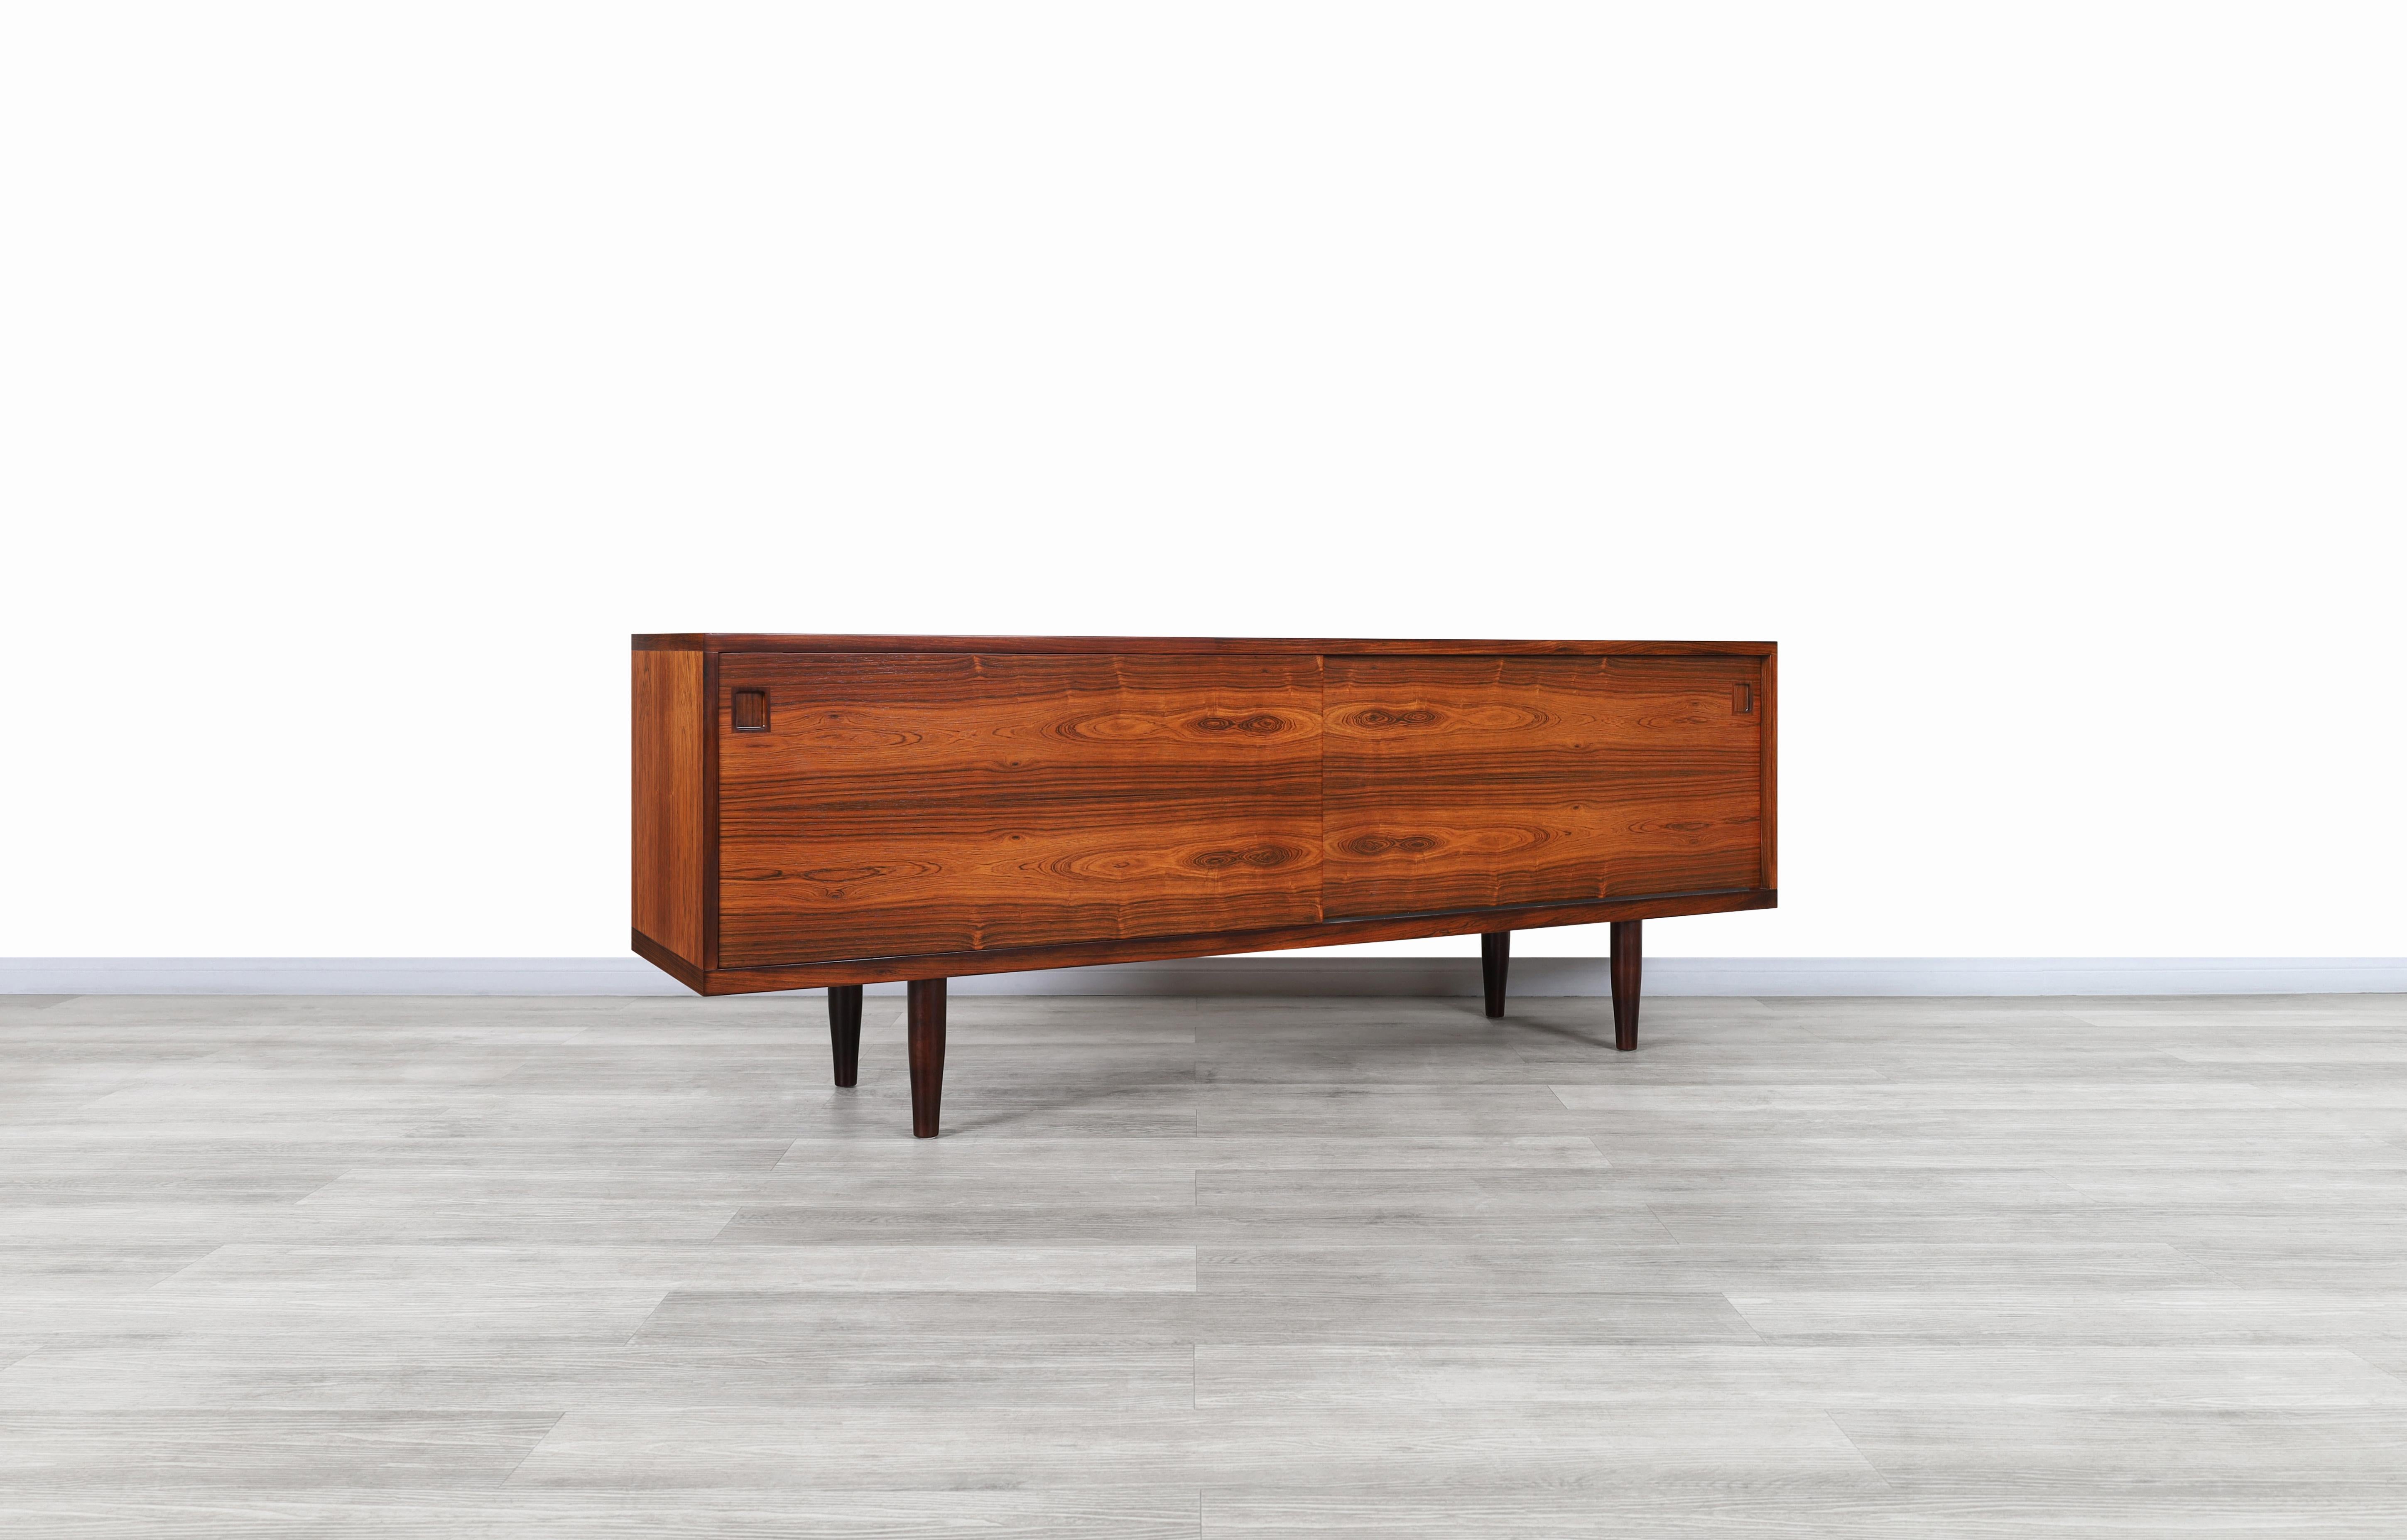 Stunning Danish Brazilian rosewood credenza designed by Niels O. Moller for J.L. Møller Møbelfabrik, circa 1950s. This rare credenza corresponds to model #20 from a unique collection by designer Niels O. Møller, highlighting the design and fine